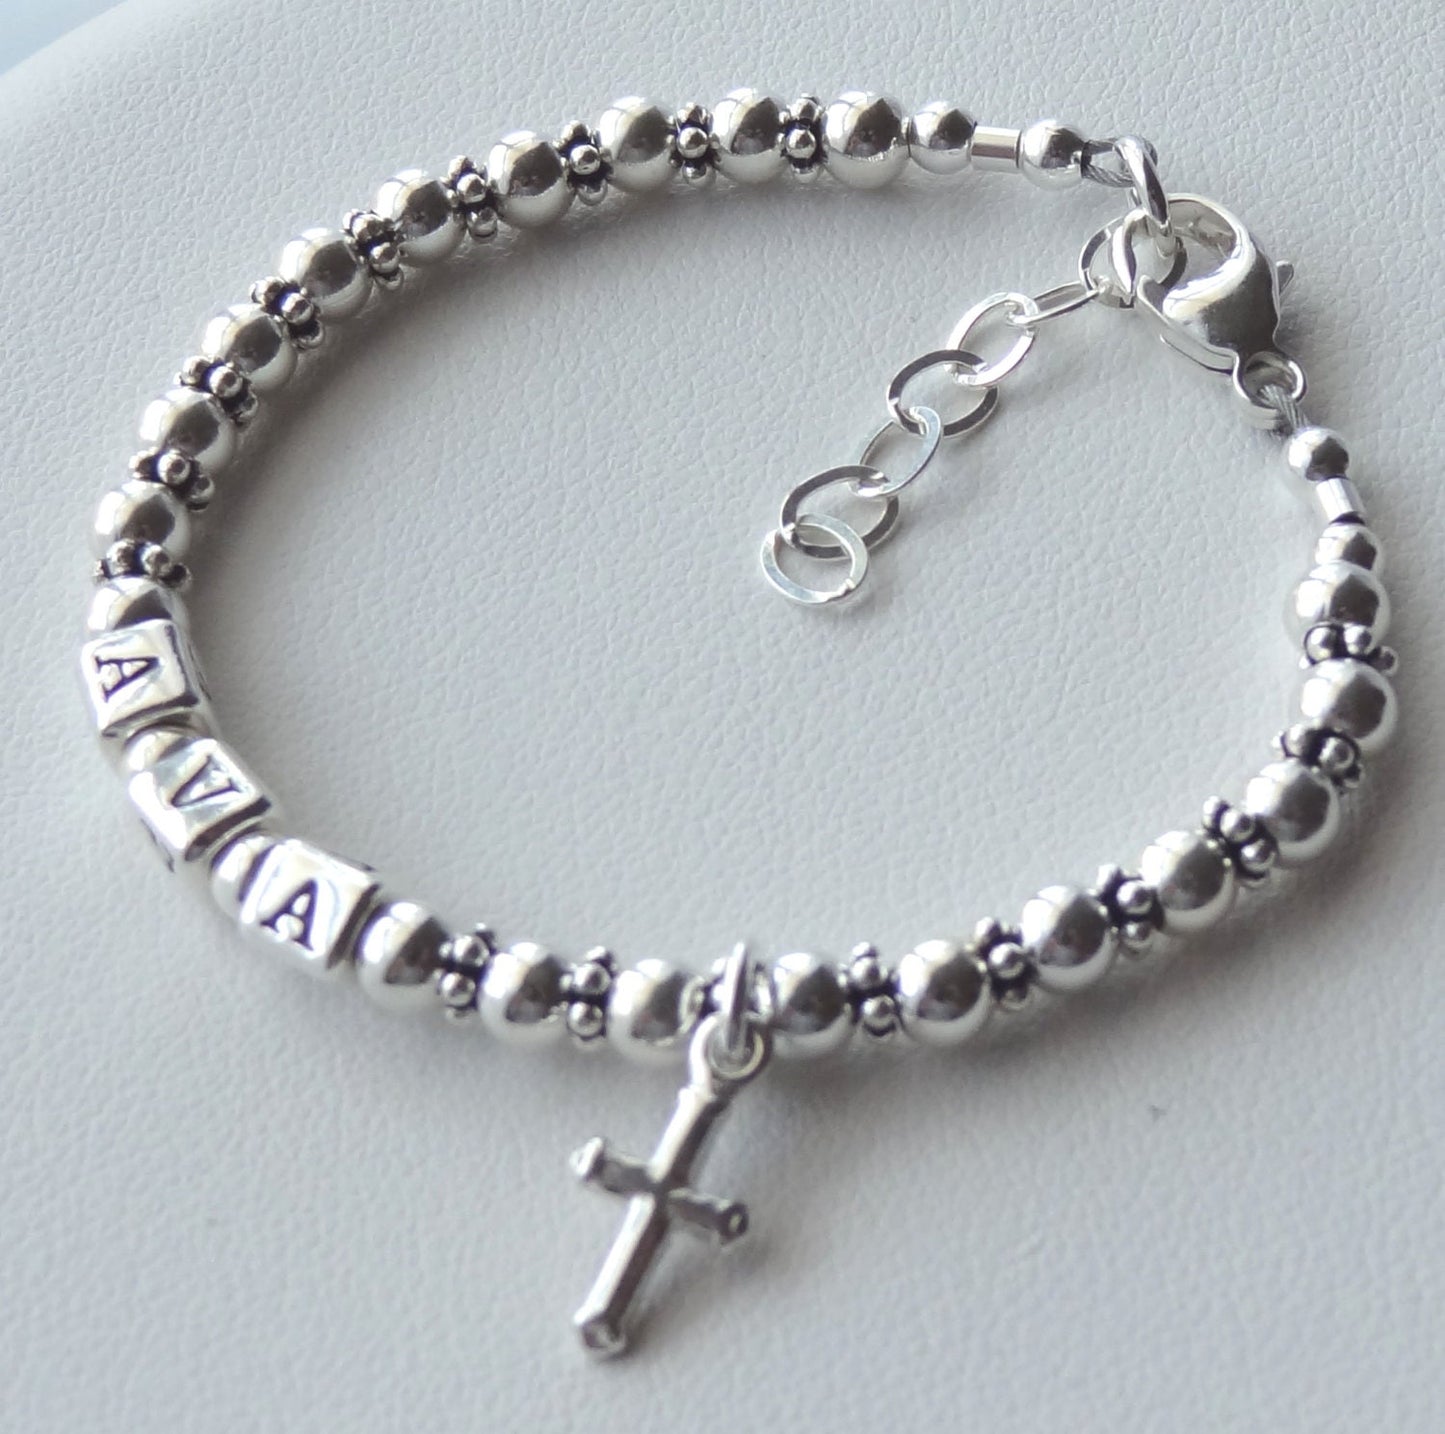 BOY-GIRL-Personalized Silver Baby Name Bracelet,Silver Boy Name Bracelet, Boy Bracelet, Baptism Baby Boy Bracelet, Baby Boy Cross Bracelet